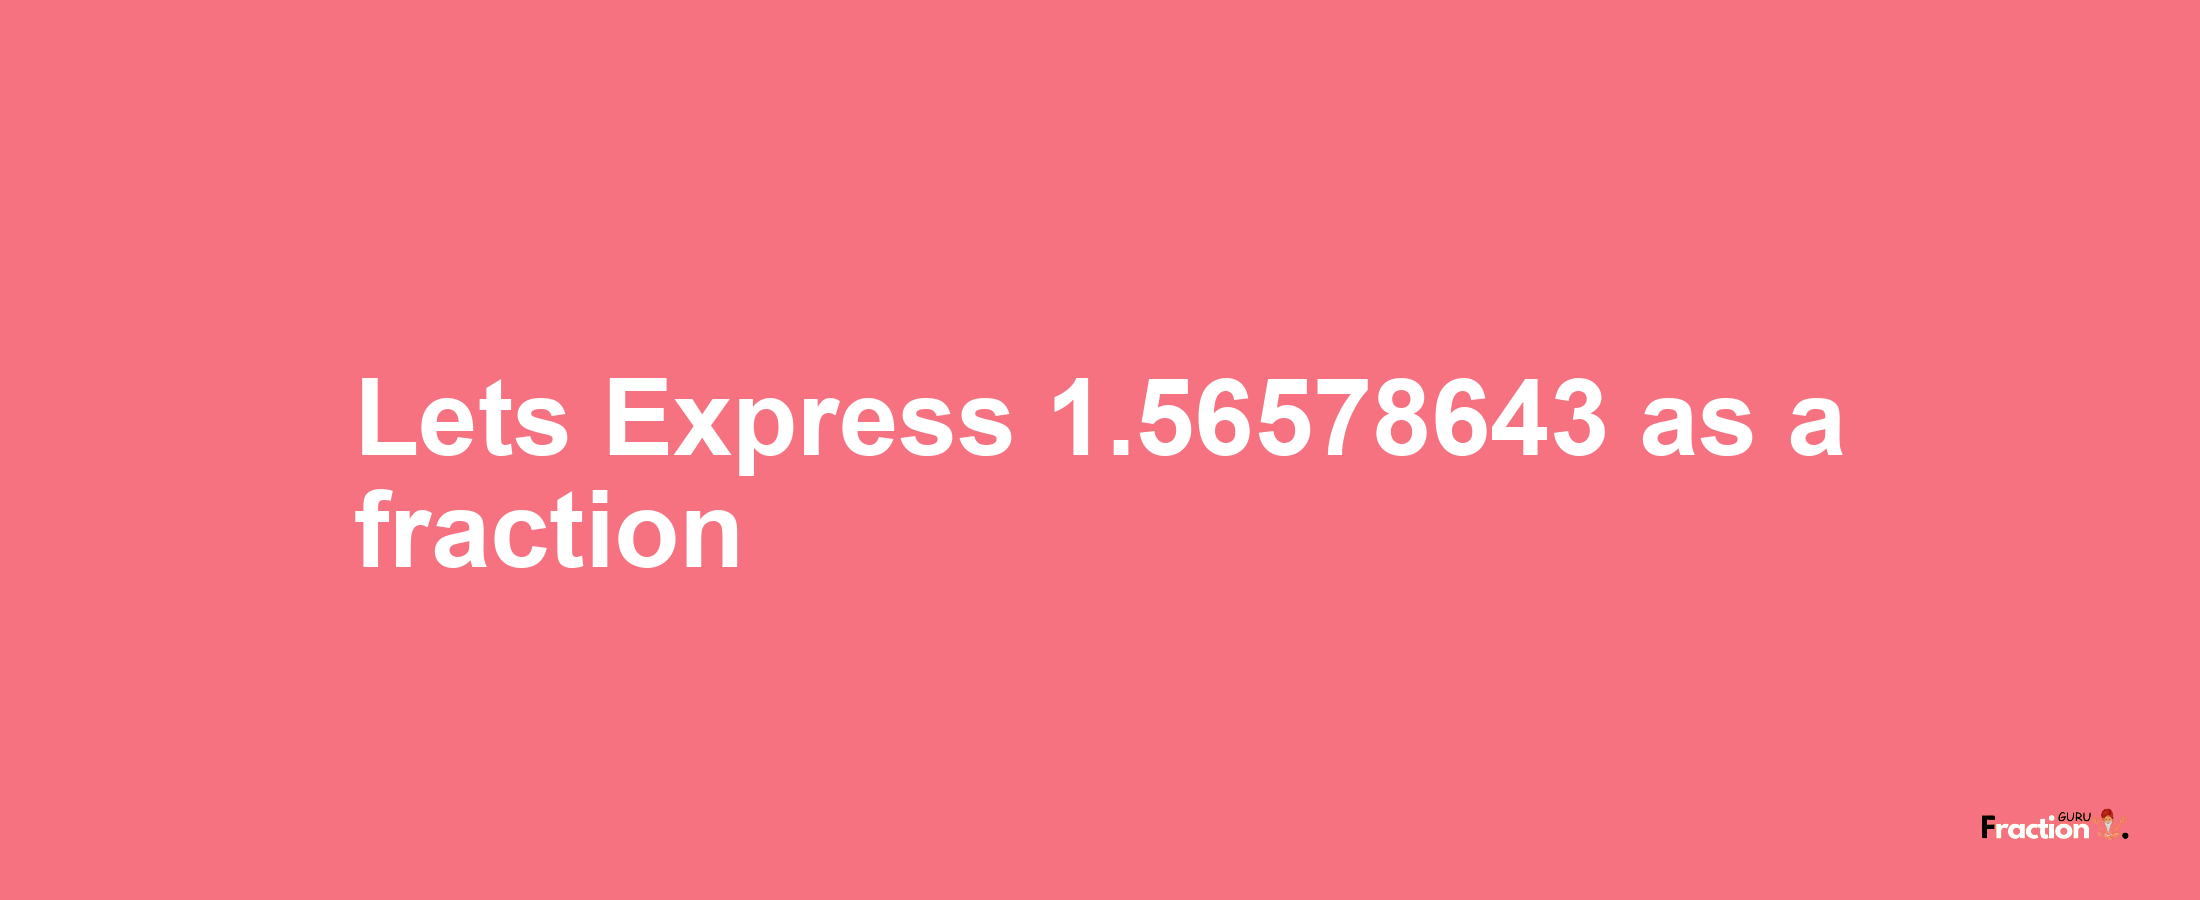 Lets Express 1.56578643 as afraction